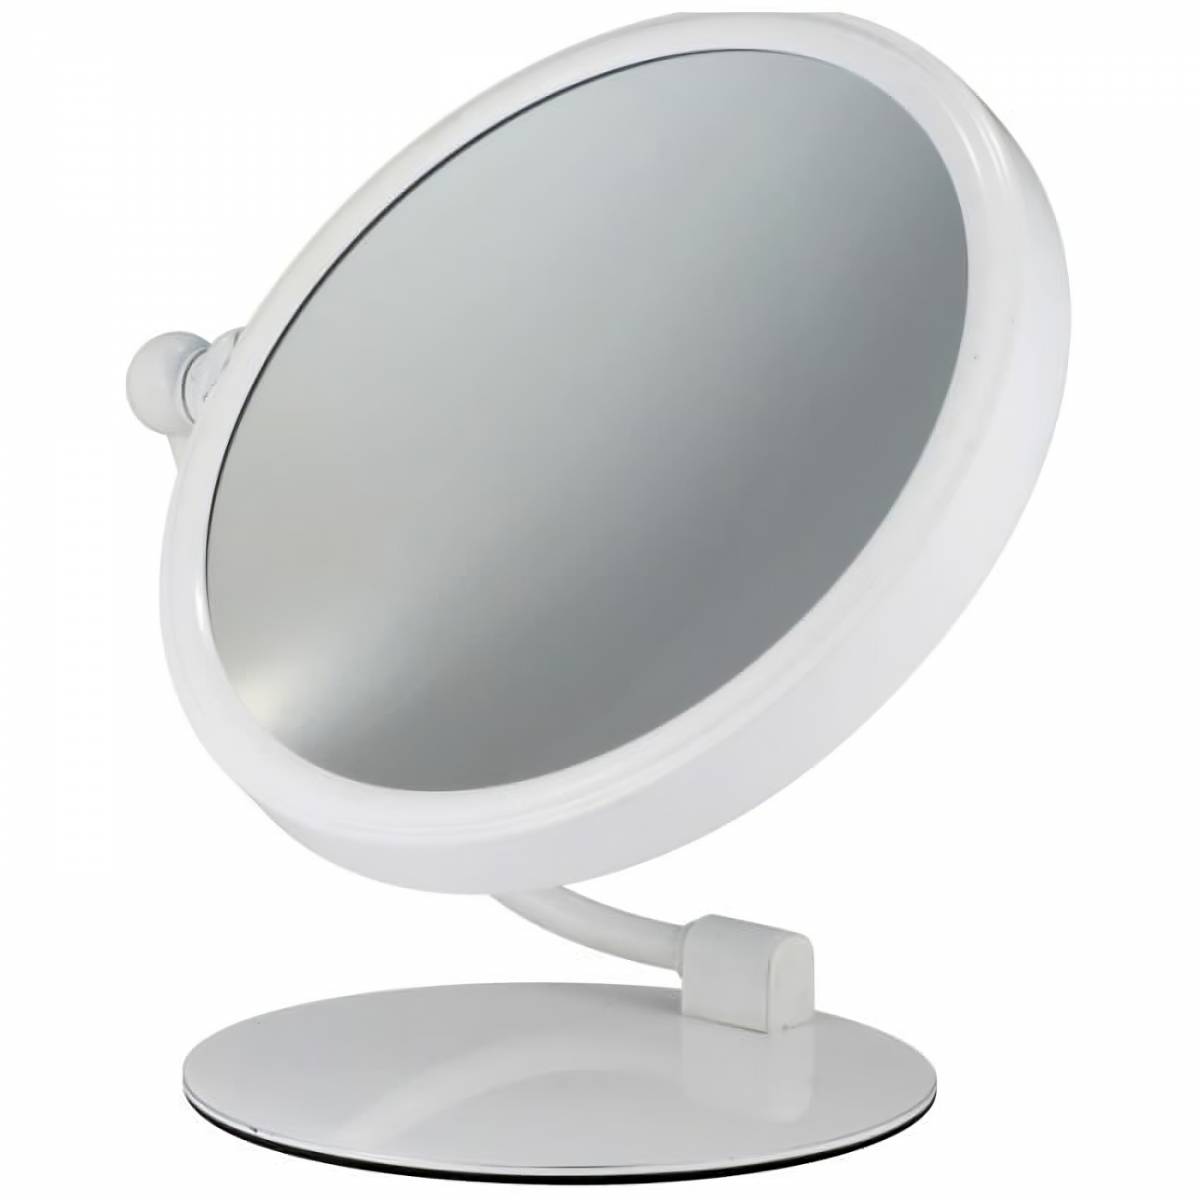 Pradel LUCIE Magnifying Double-Sided Table Mirror x3 / x1 Ø20cm